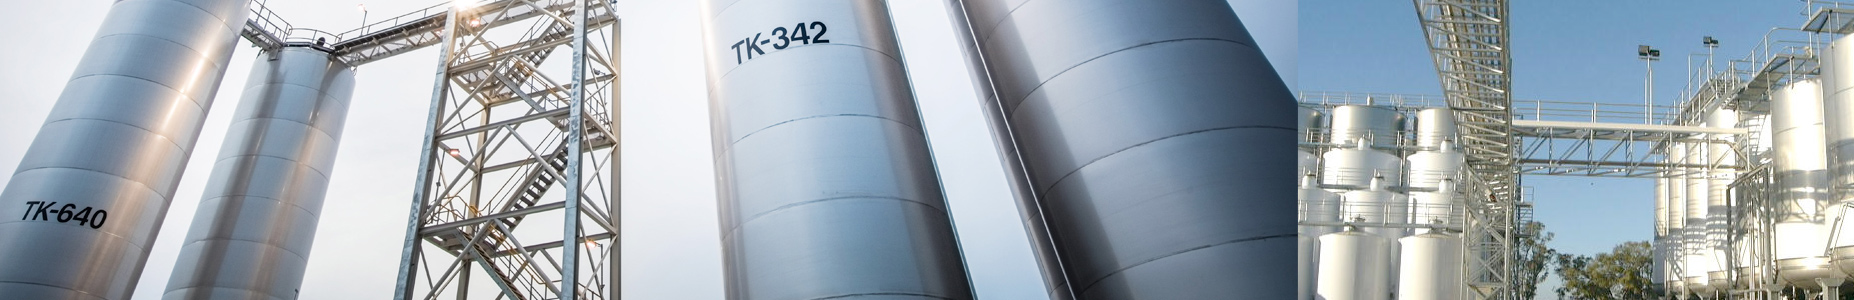 Stainless Steel Tanks, furphy engineering, stainless steel tanks, pressure vessels, manufacturers, speciality, integrity services, mixing tank